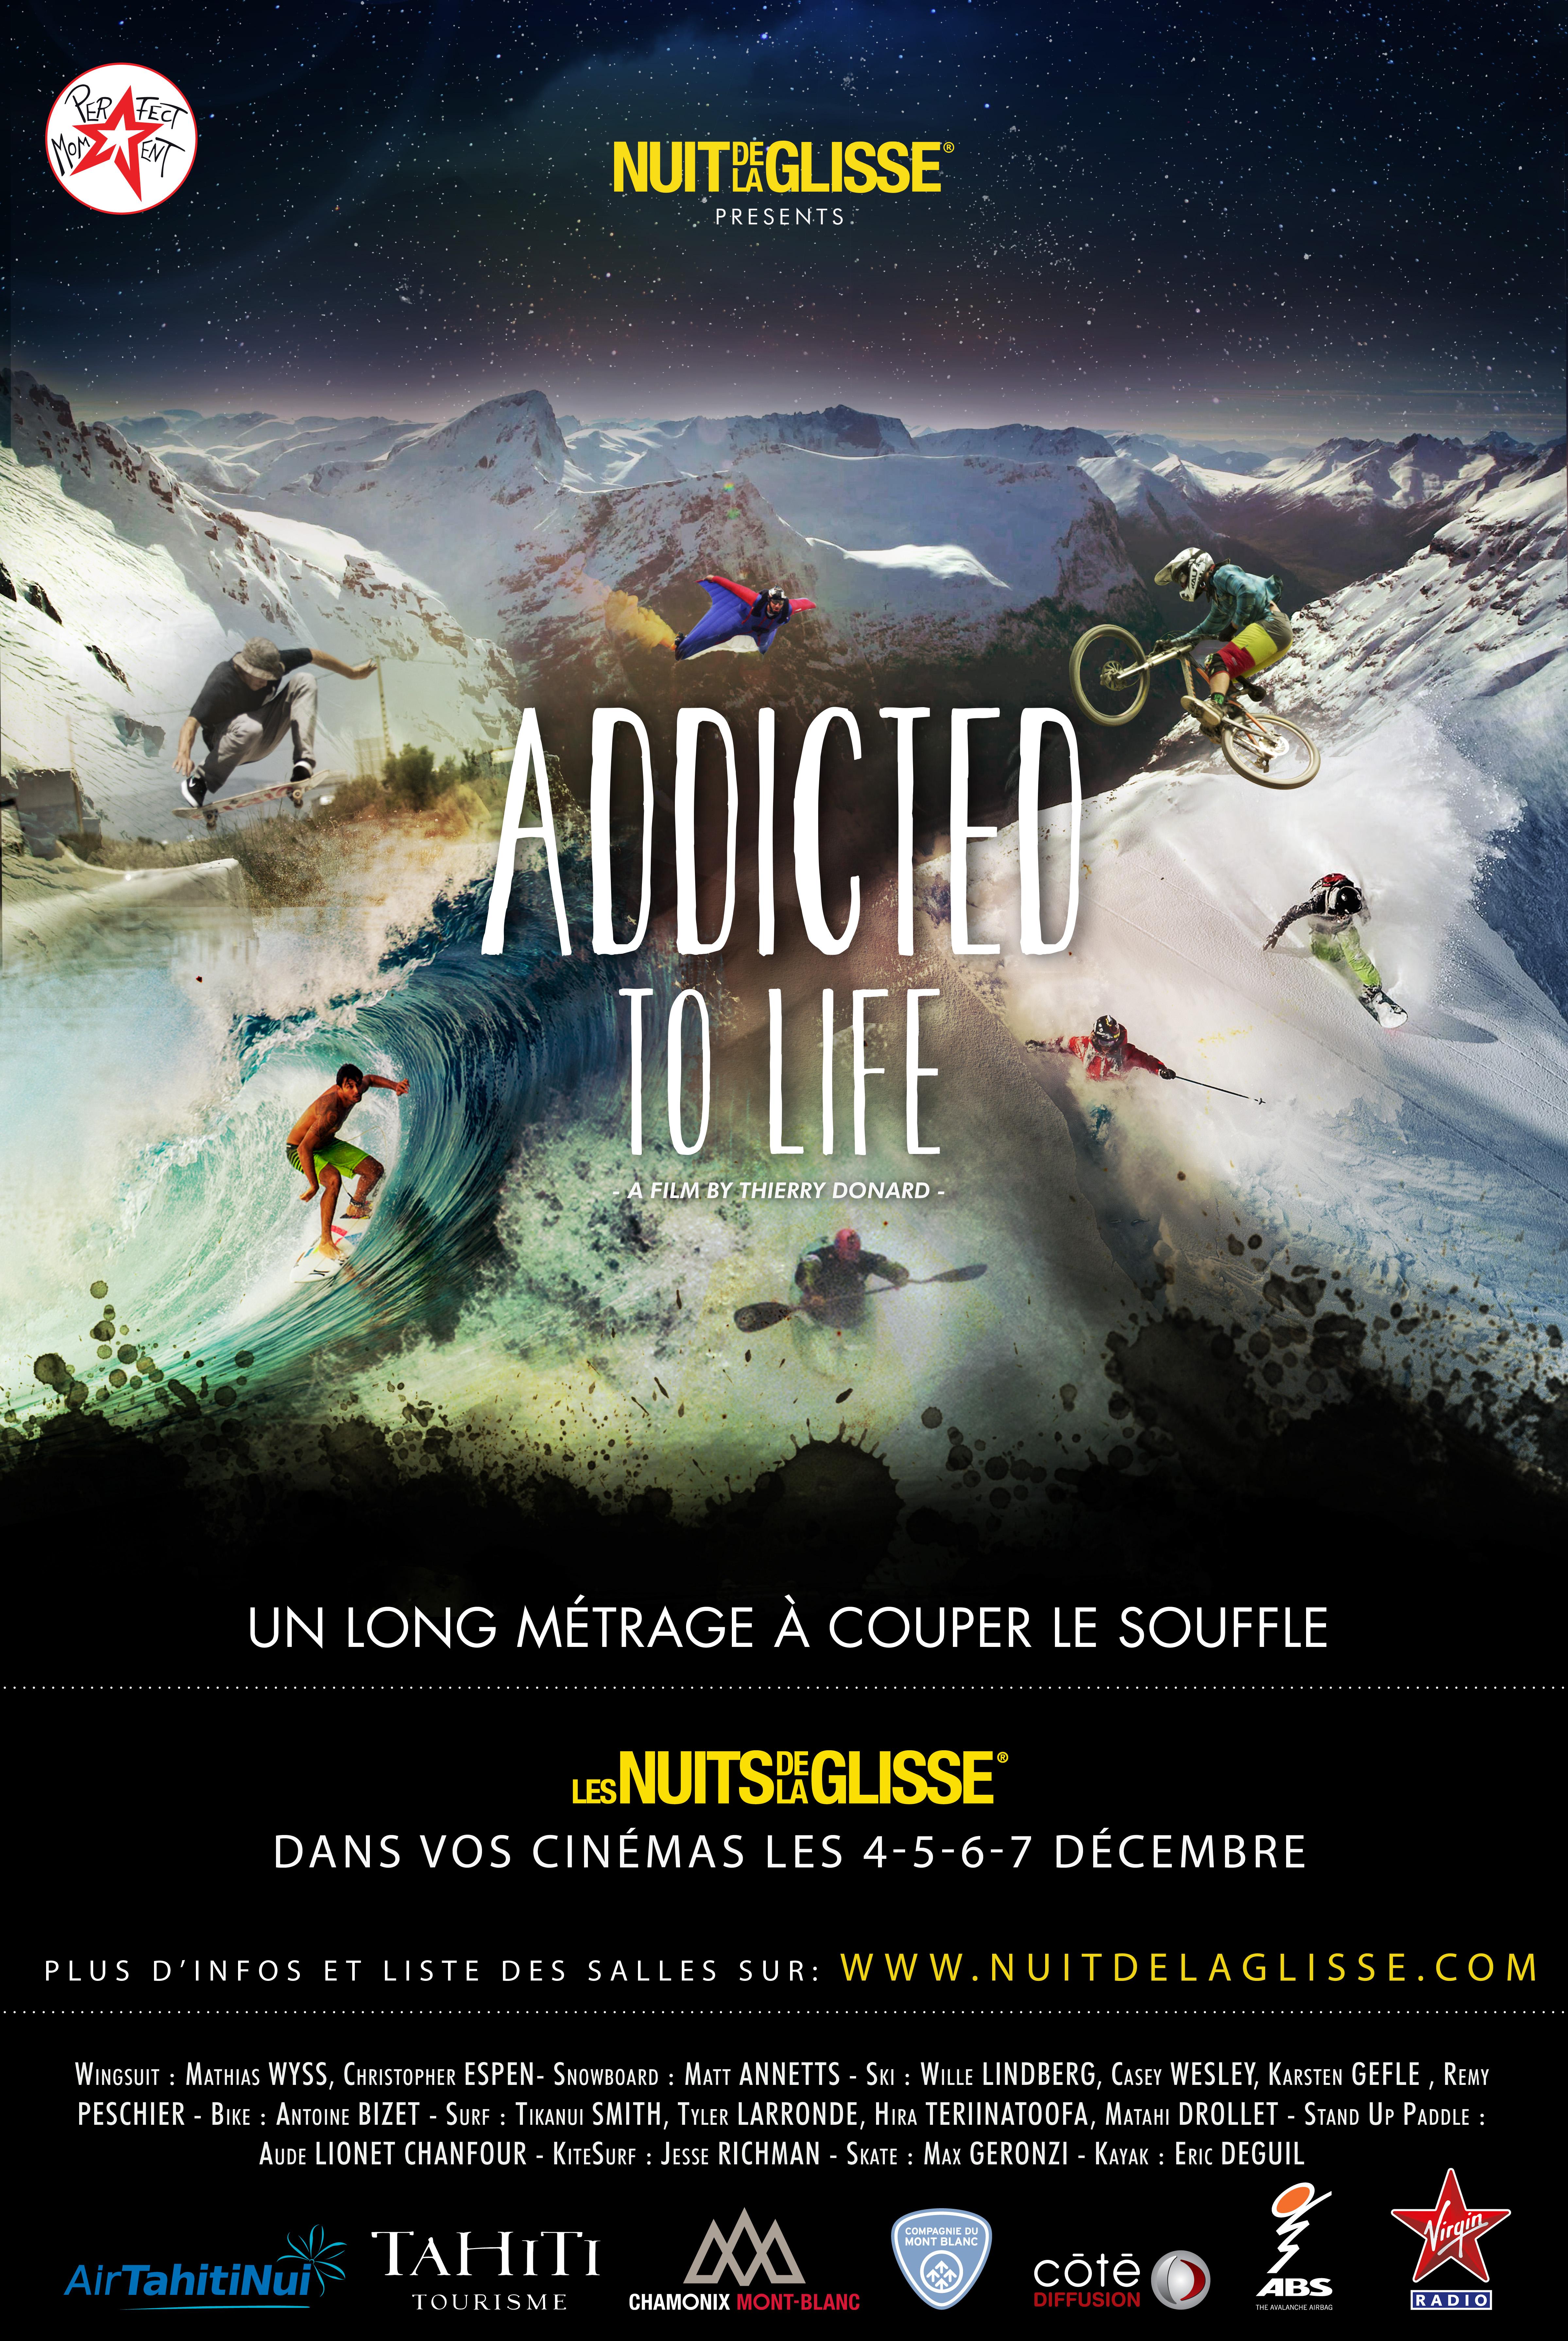 Addicted to life, juste époustouflant!